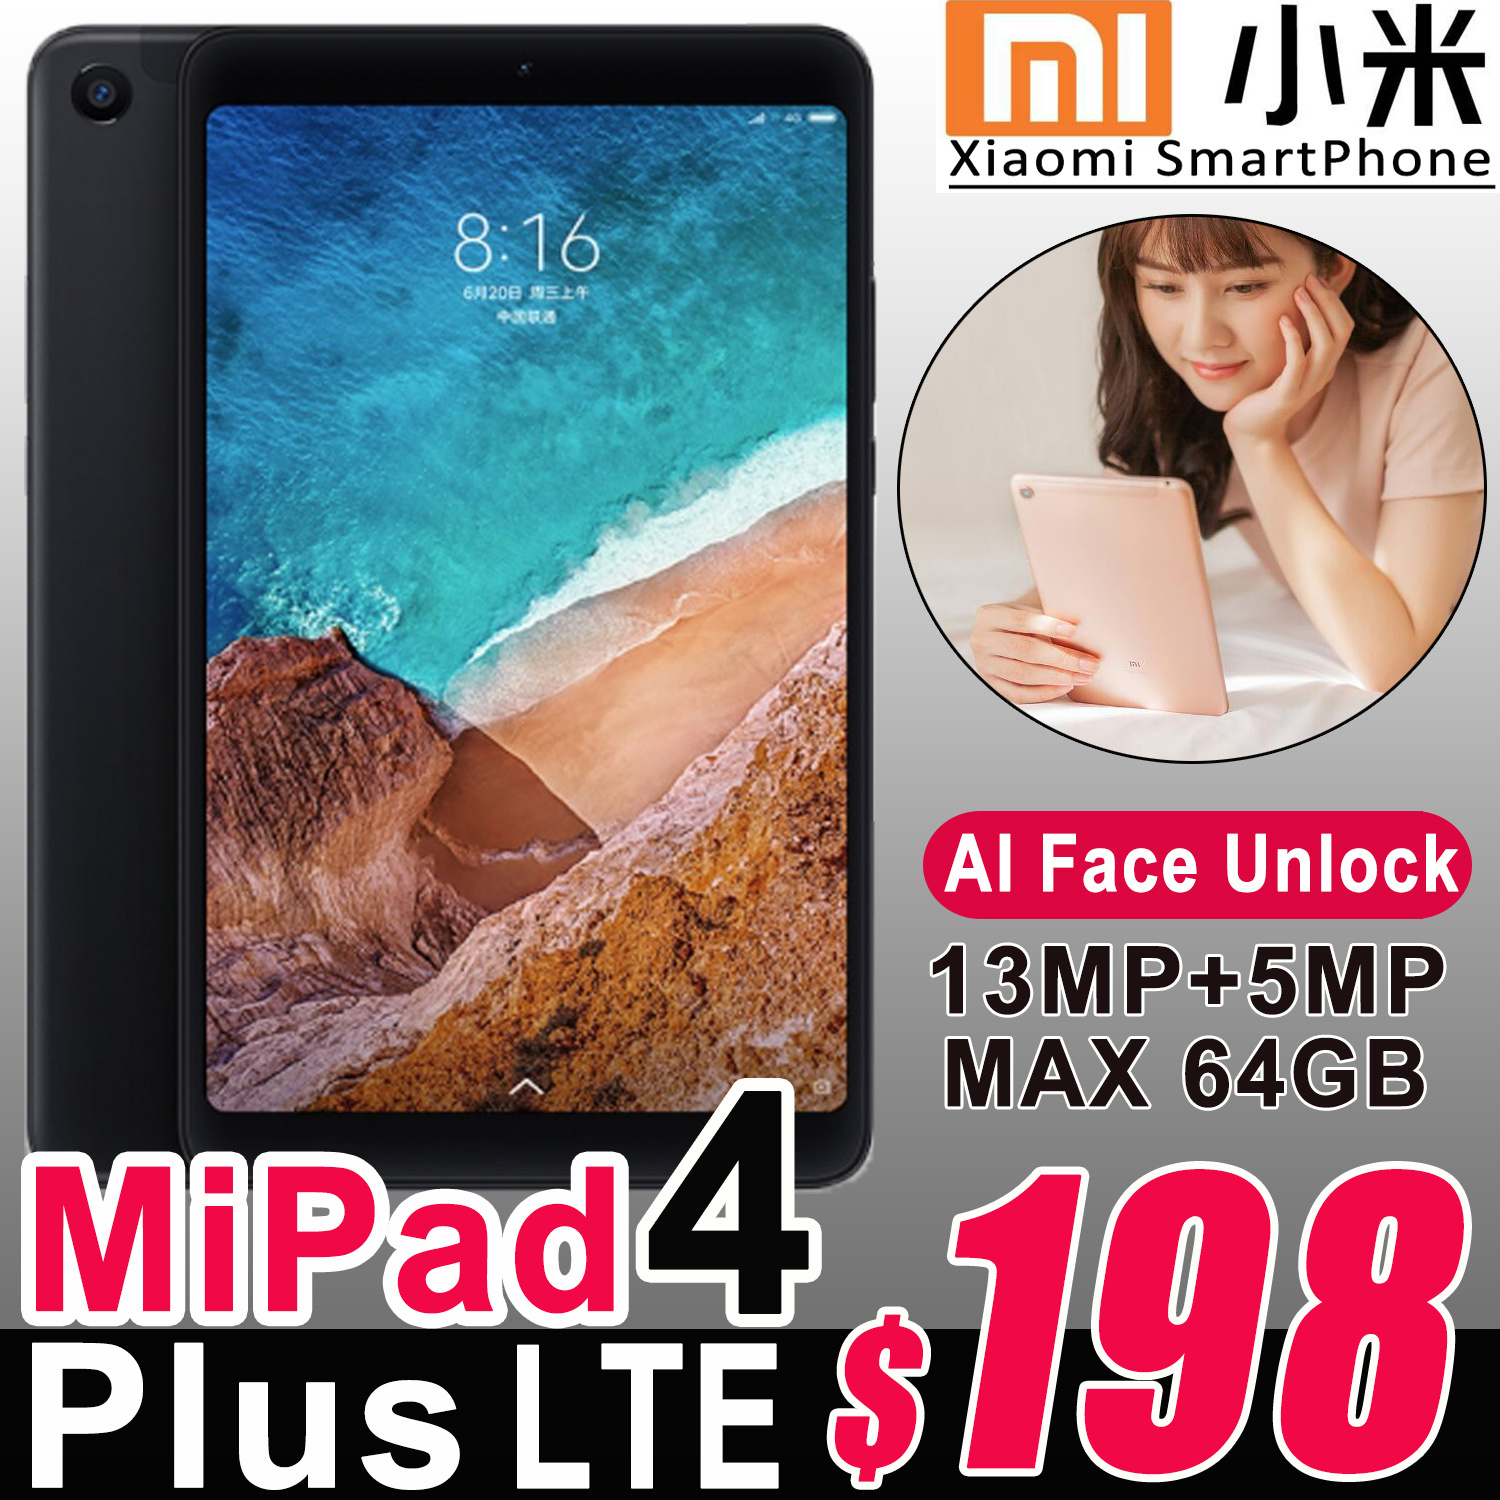 Qoo10 Authentic Xiaomi Mi Pad 4 Plus Android Tablet Pc 8 0 10 1inch Snapdrag Mobile Devices